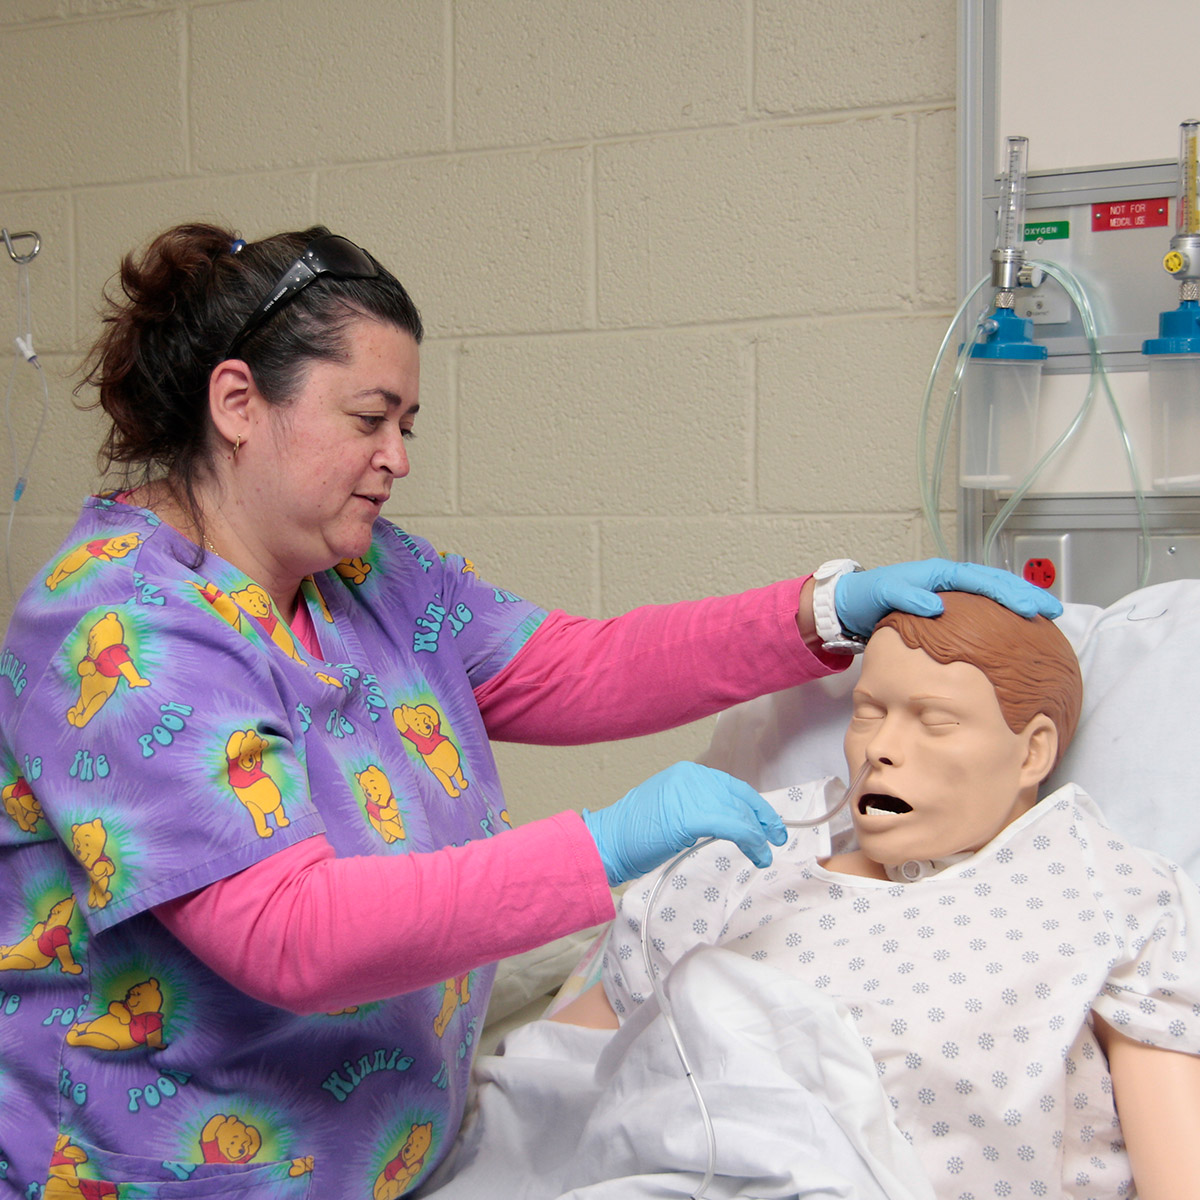 CCD Integrated Nursing Pathway student practicing with a medical dummy